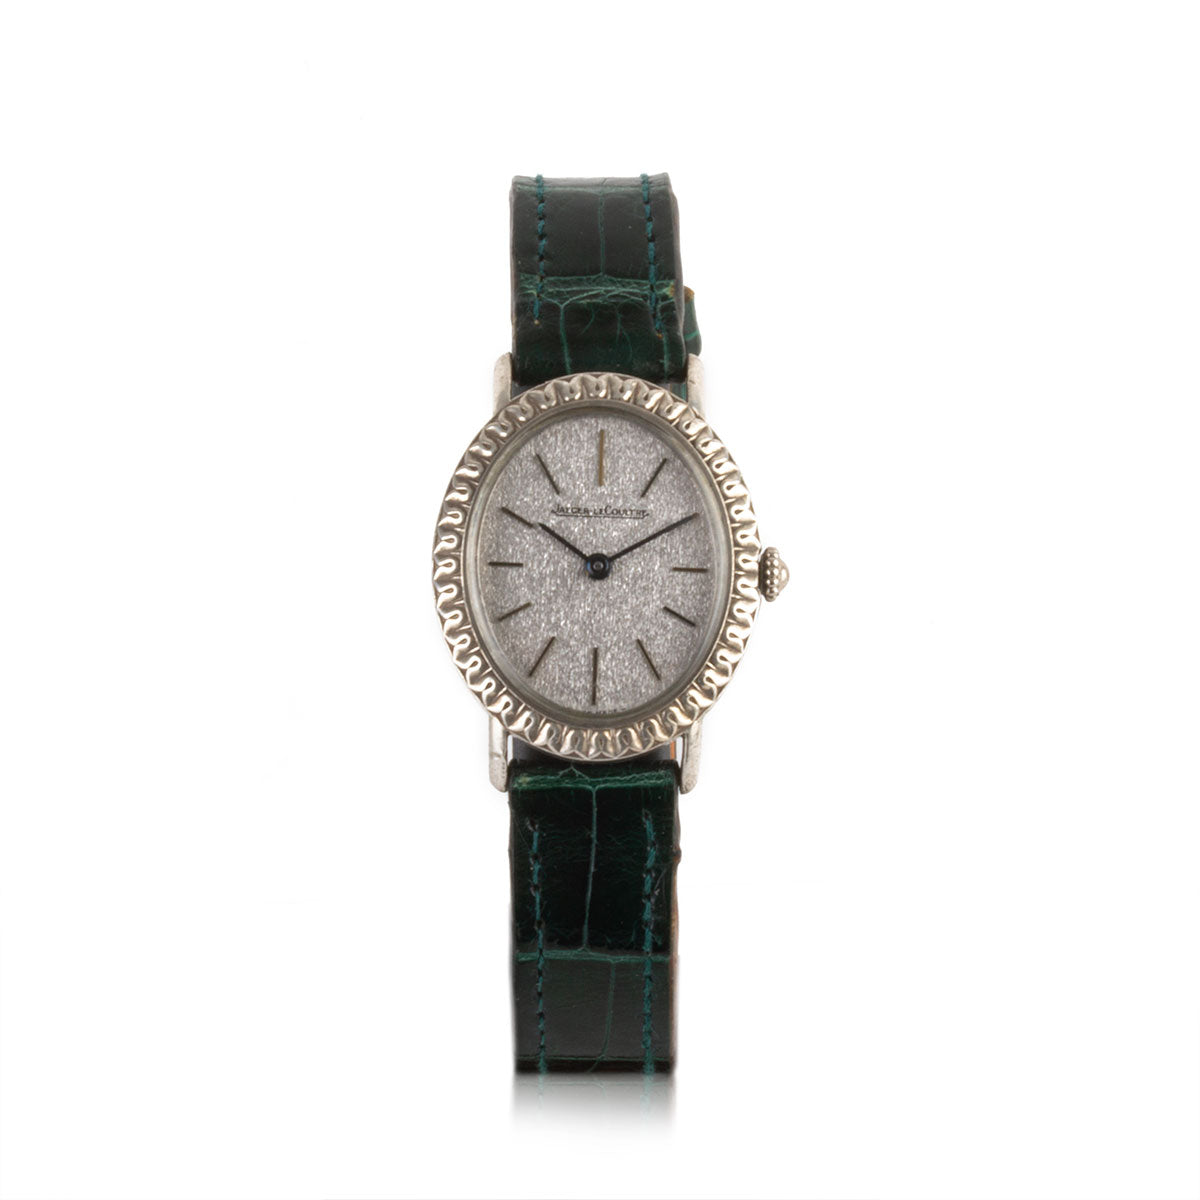 ​Second-hand watch - Jaeger Lecoultre - 2000€